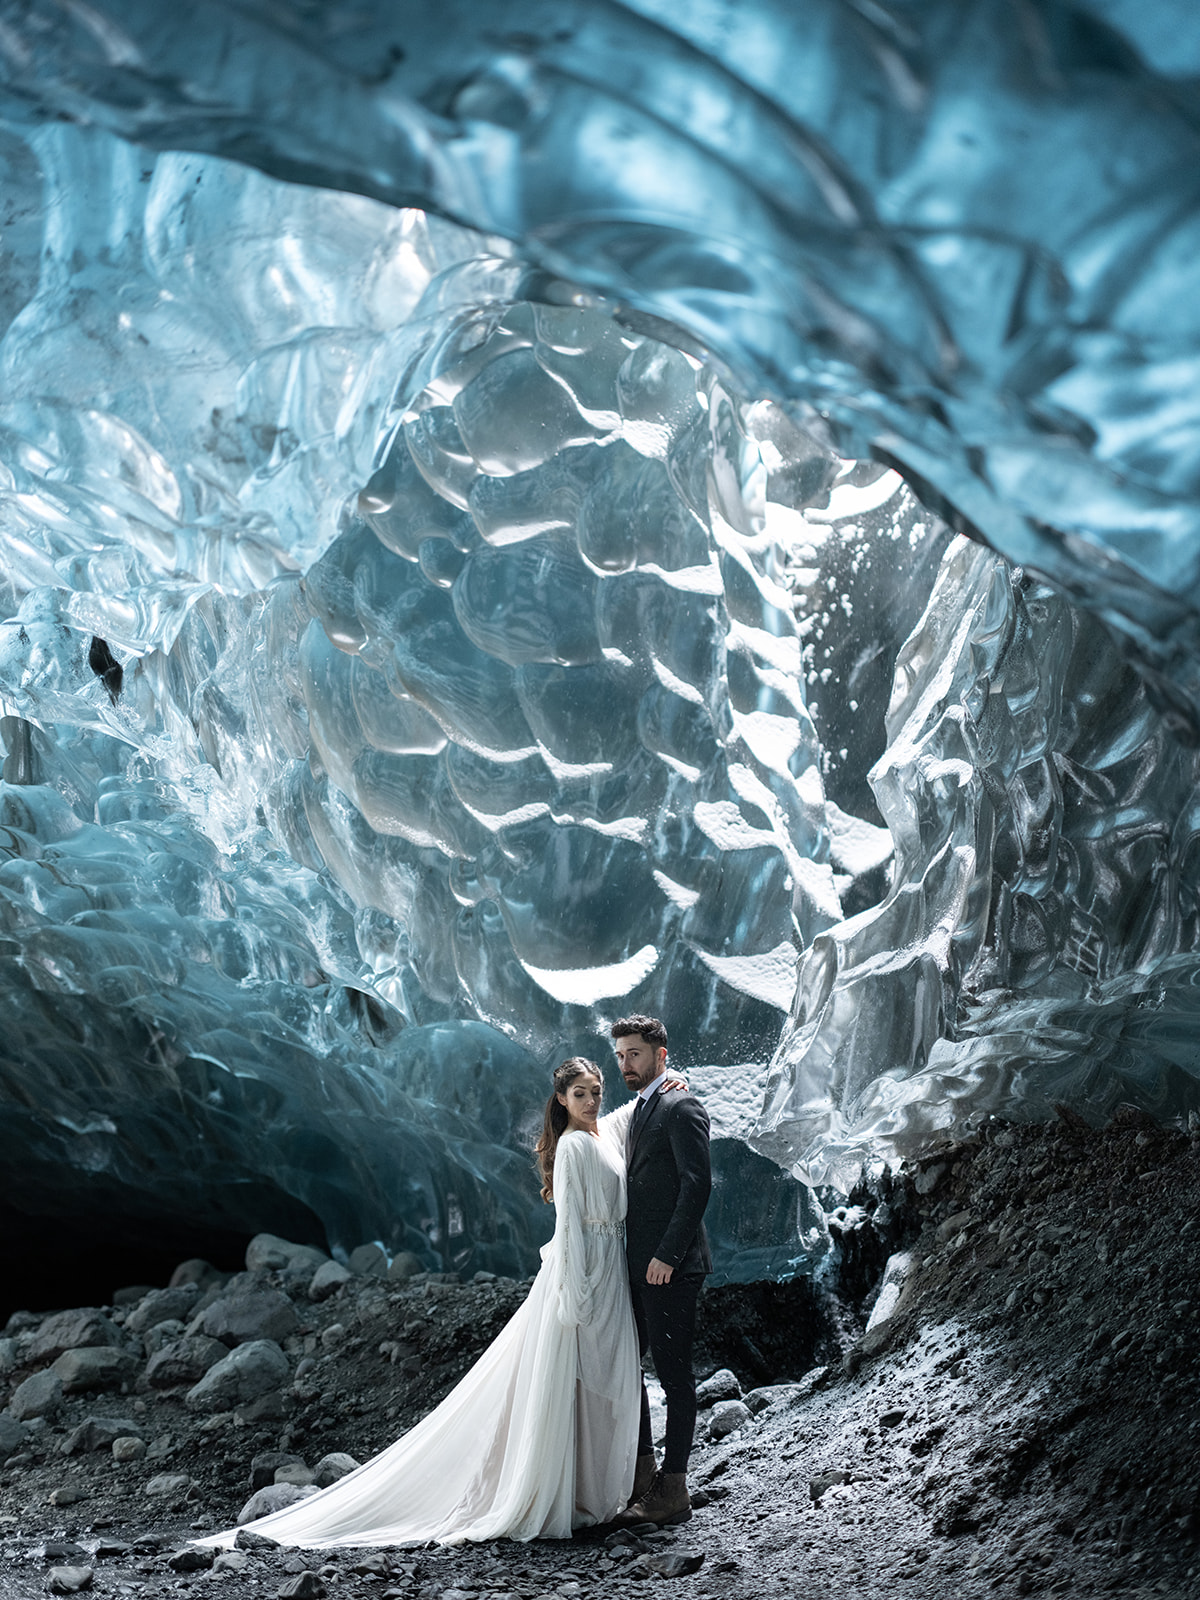 Bride and groom kissing in an Ice Cave on their Elopement day in Iceland.